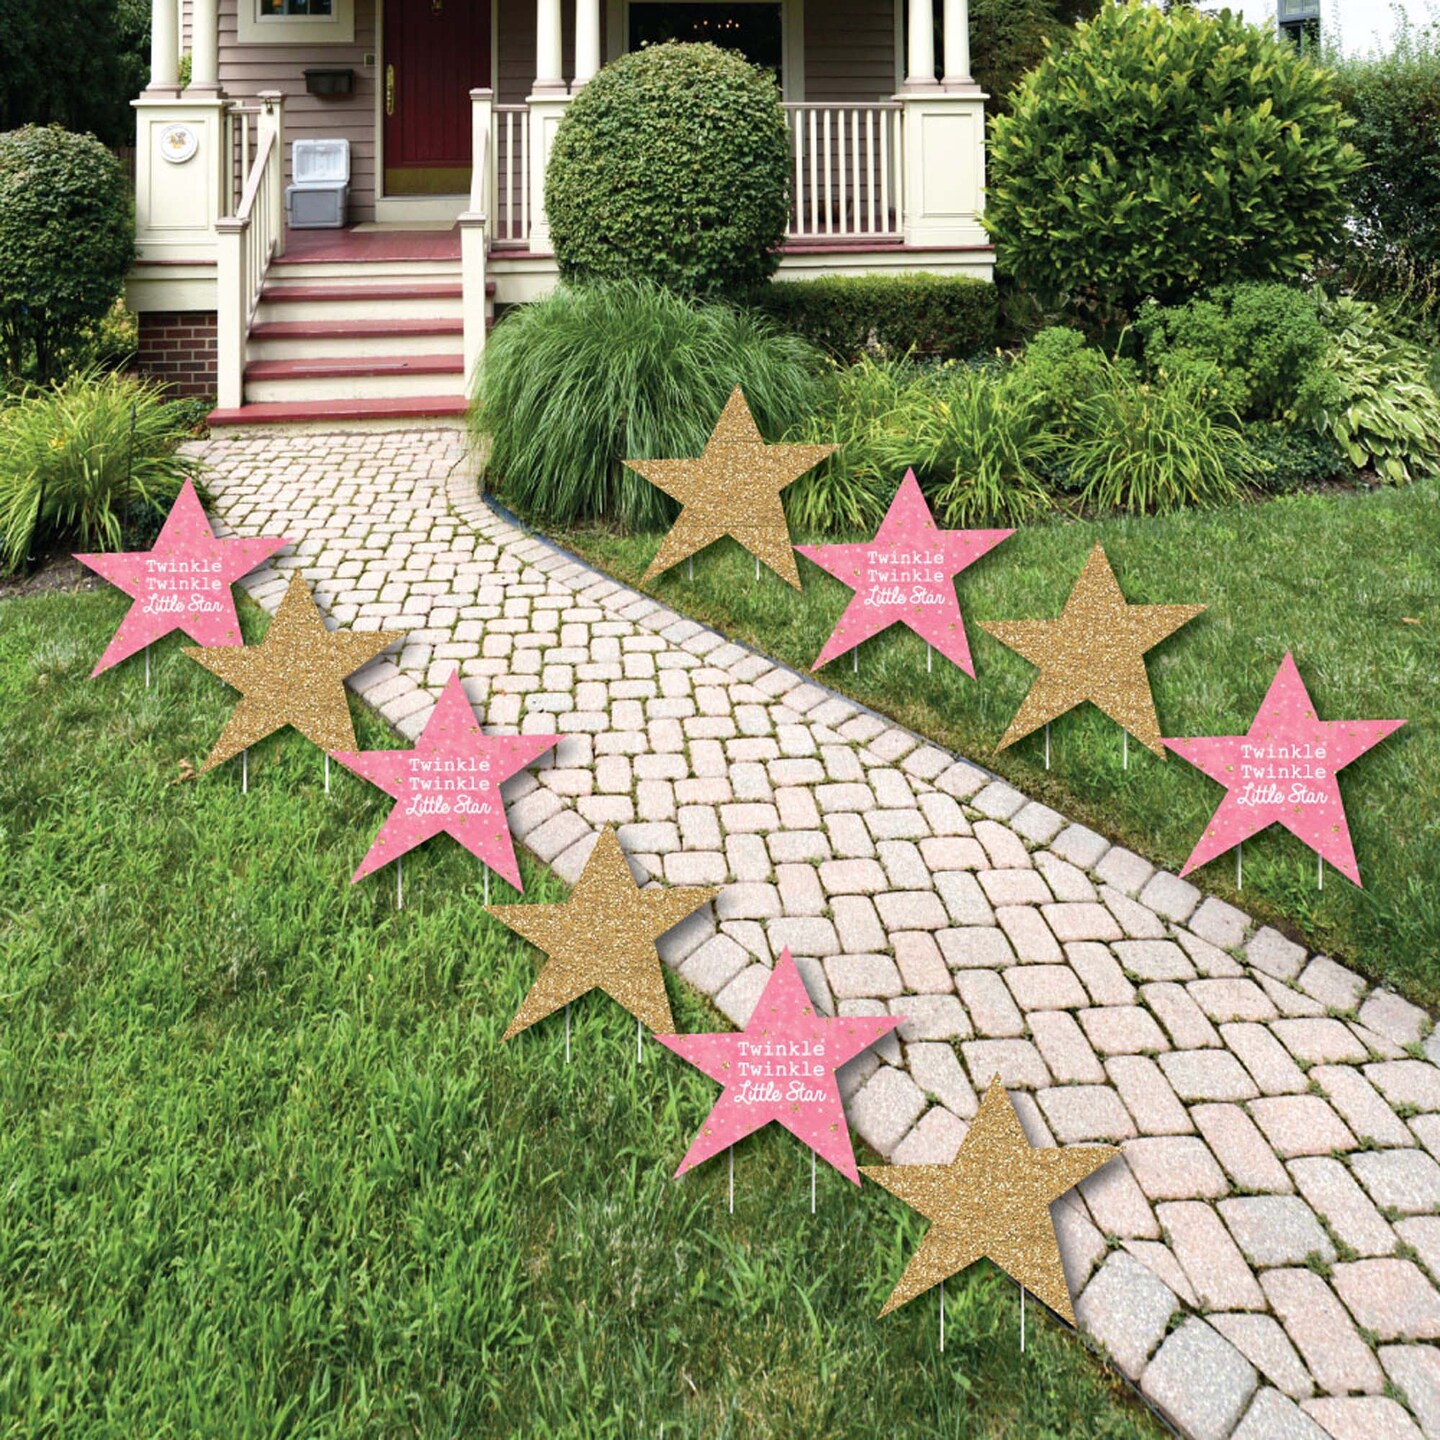 Big Dot of Happiness Pink Twinkle Twinkle Little Star - Lawn Decorations - Outdoor Baby Shower or Birthday Party Yard Decorations - 10 Piece